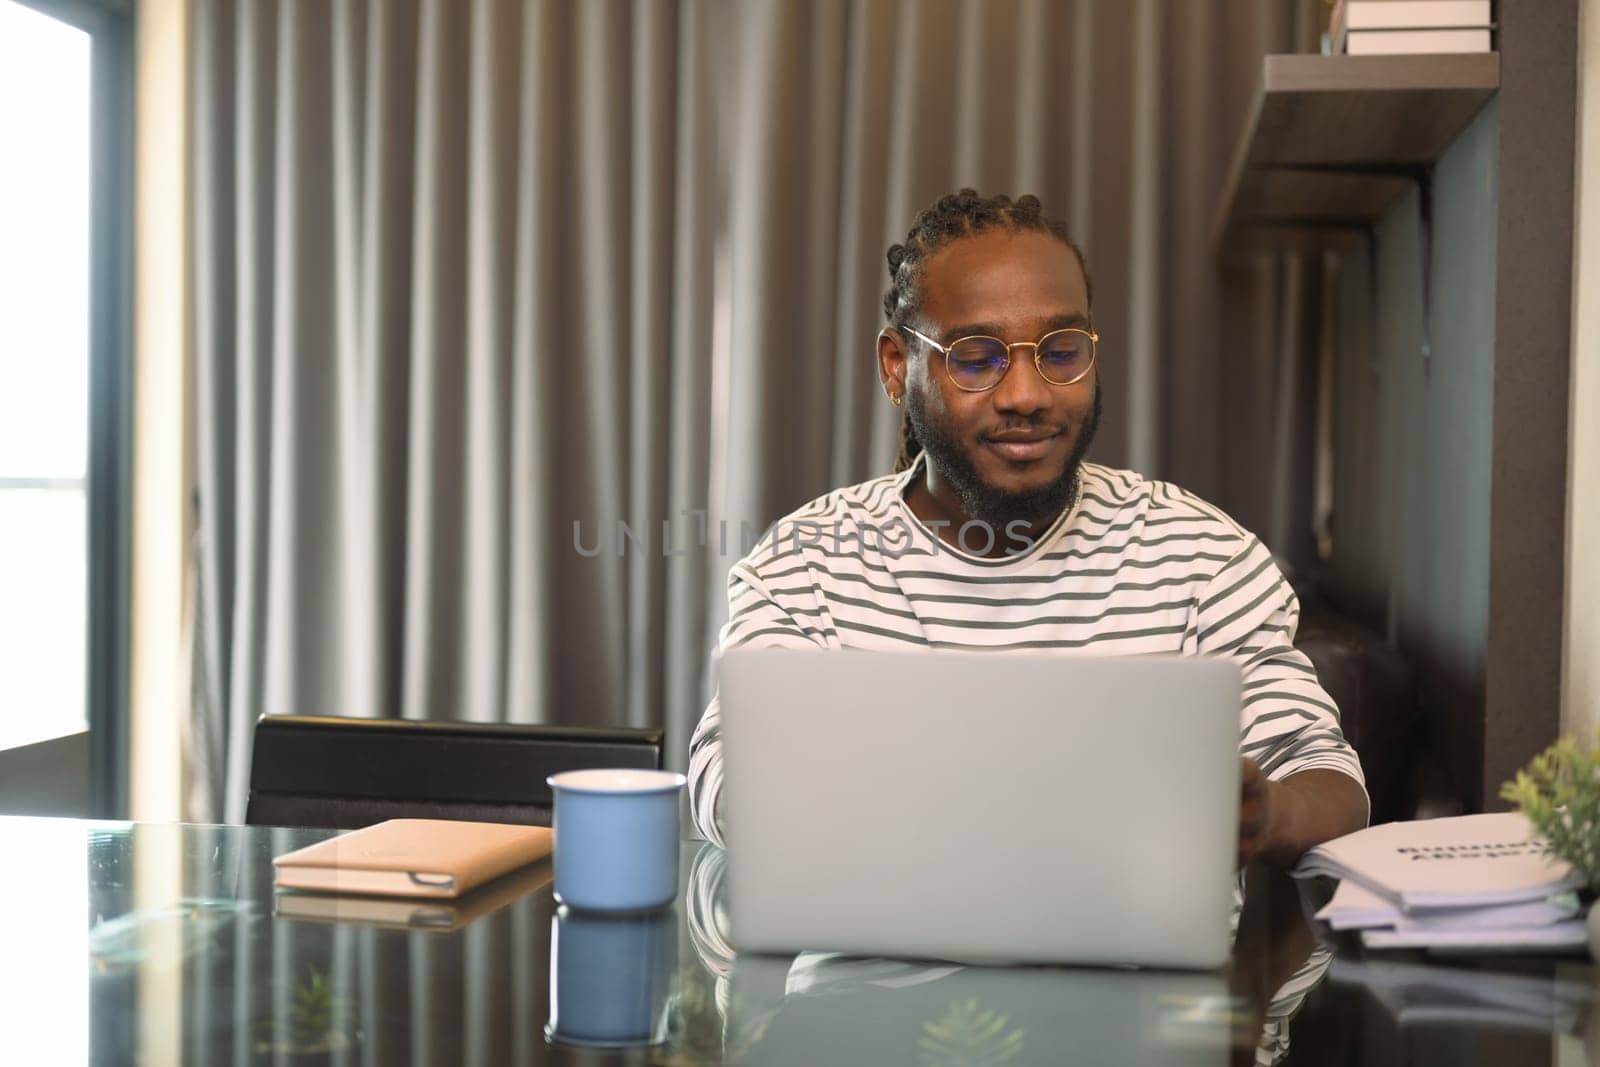 Smiling bearded African man working remotely from home using laptop on dinning table.